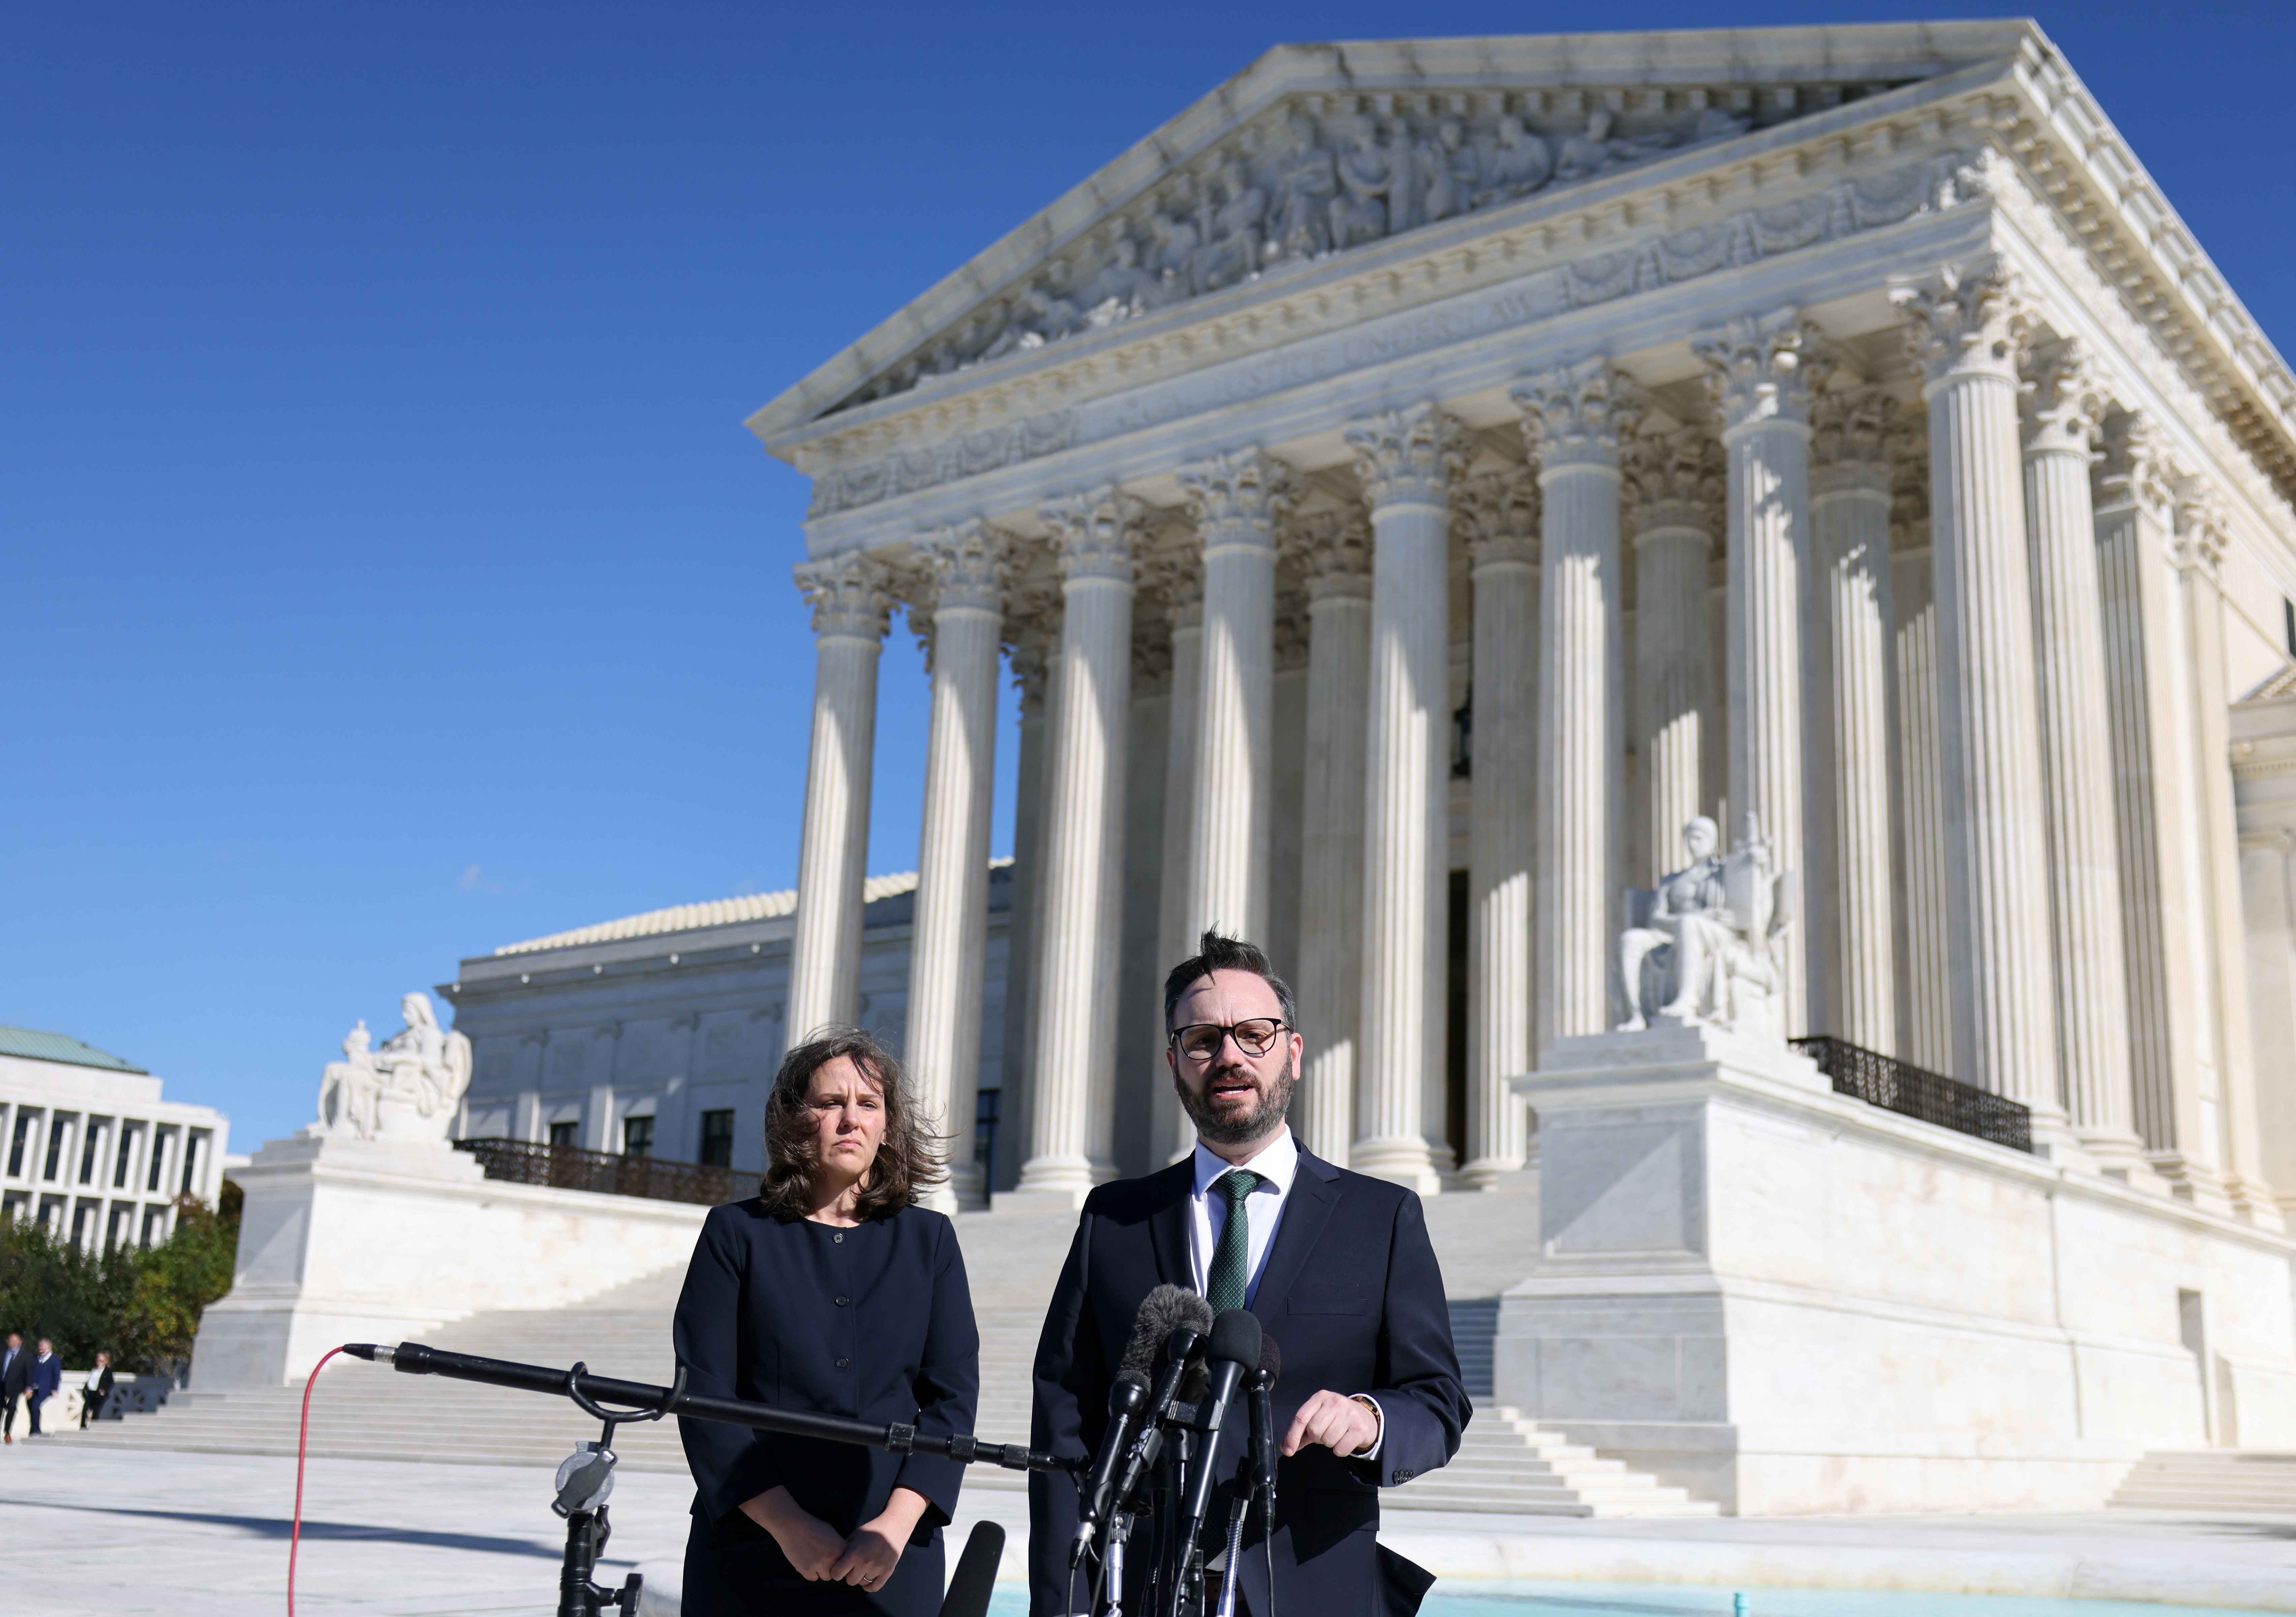 Attorney Marc Hearron with the Center for Reproductive Rights and attorney Julie Murray with Planned Parenthood, speak to the media following arguments over a challenge to a Texas law that bans abortion after six weeks, in front of the  United States Supreme Court in Washington, U.S., November 1, 2021. REUTERS/Evelyn Hockstein